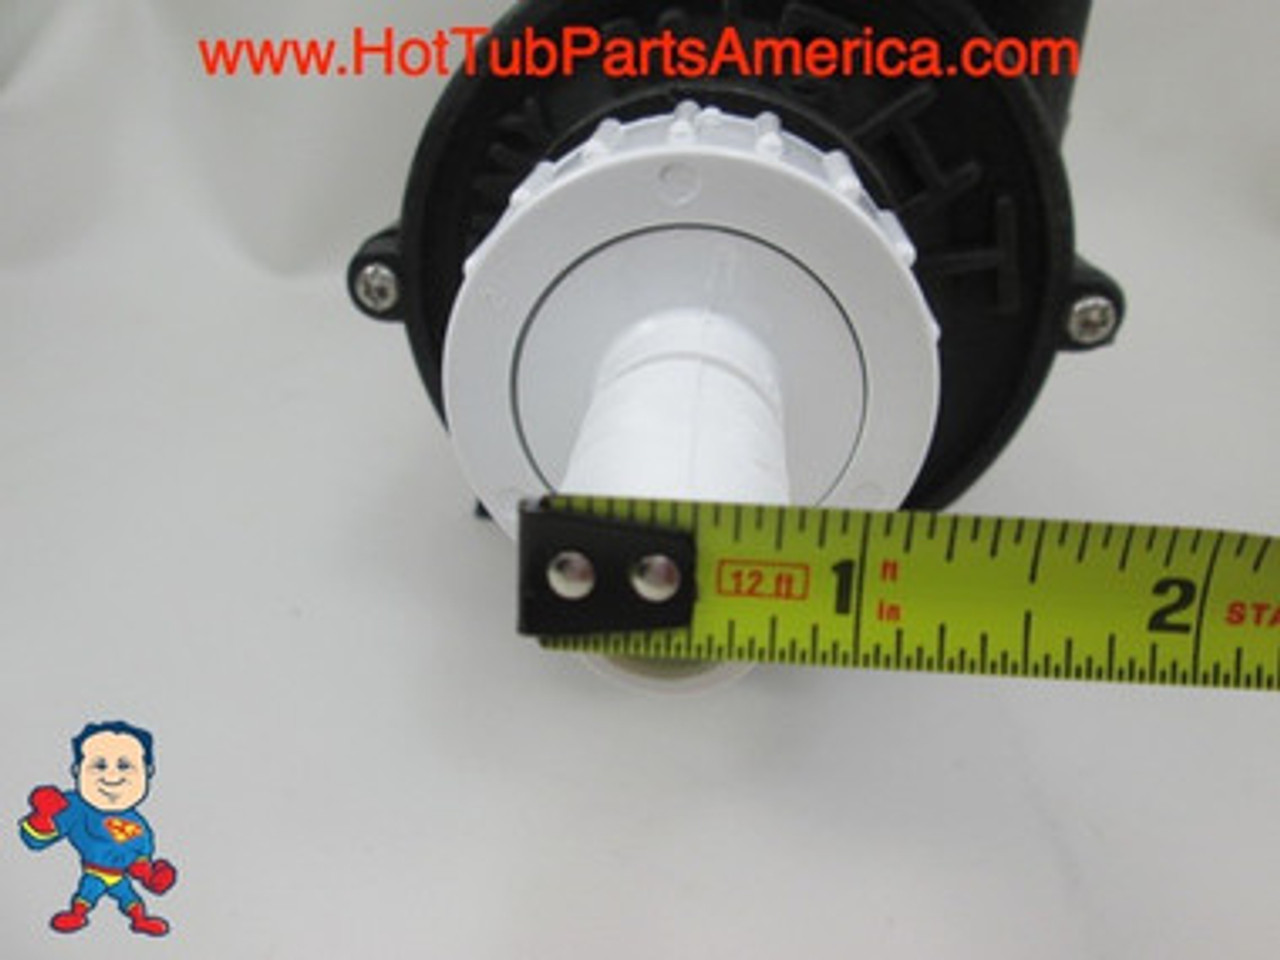 This is an example of a pump this union will fit Note: The Pump is not included. Hot Tub Spa 1" X 3/4" Barb Pump Union O-Ring Use with Tiny Might and other Pumps